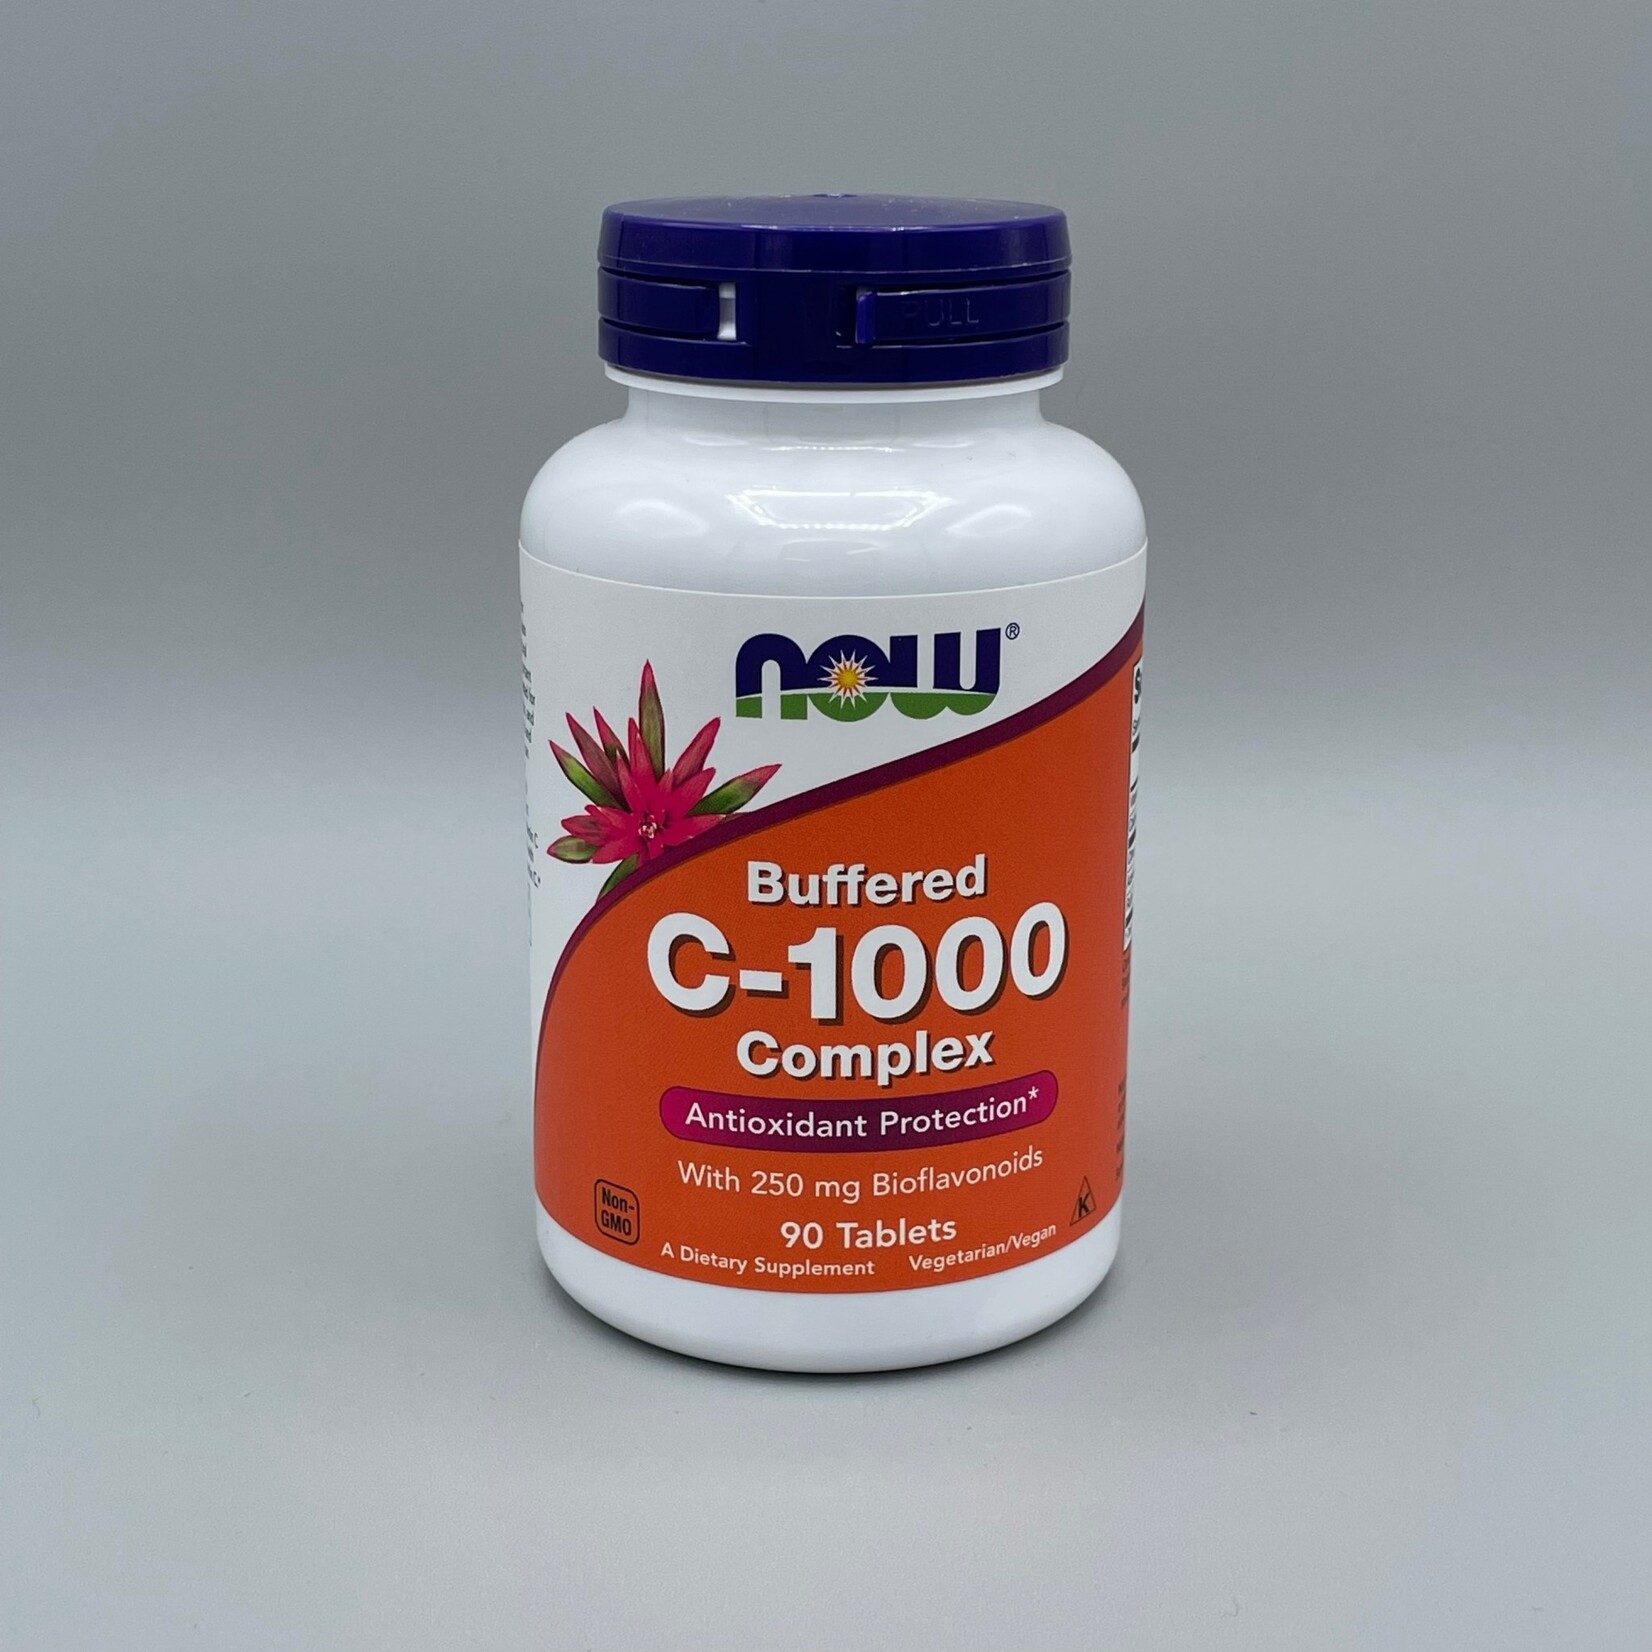 NOW Buffered C-1000 Complex (w/ 250 mg of Bioflavinoids),  90 Tablets